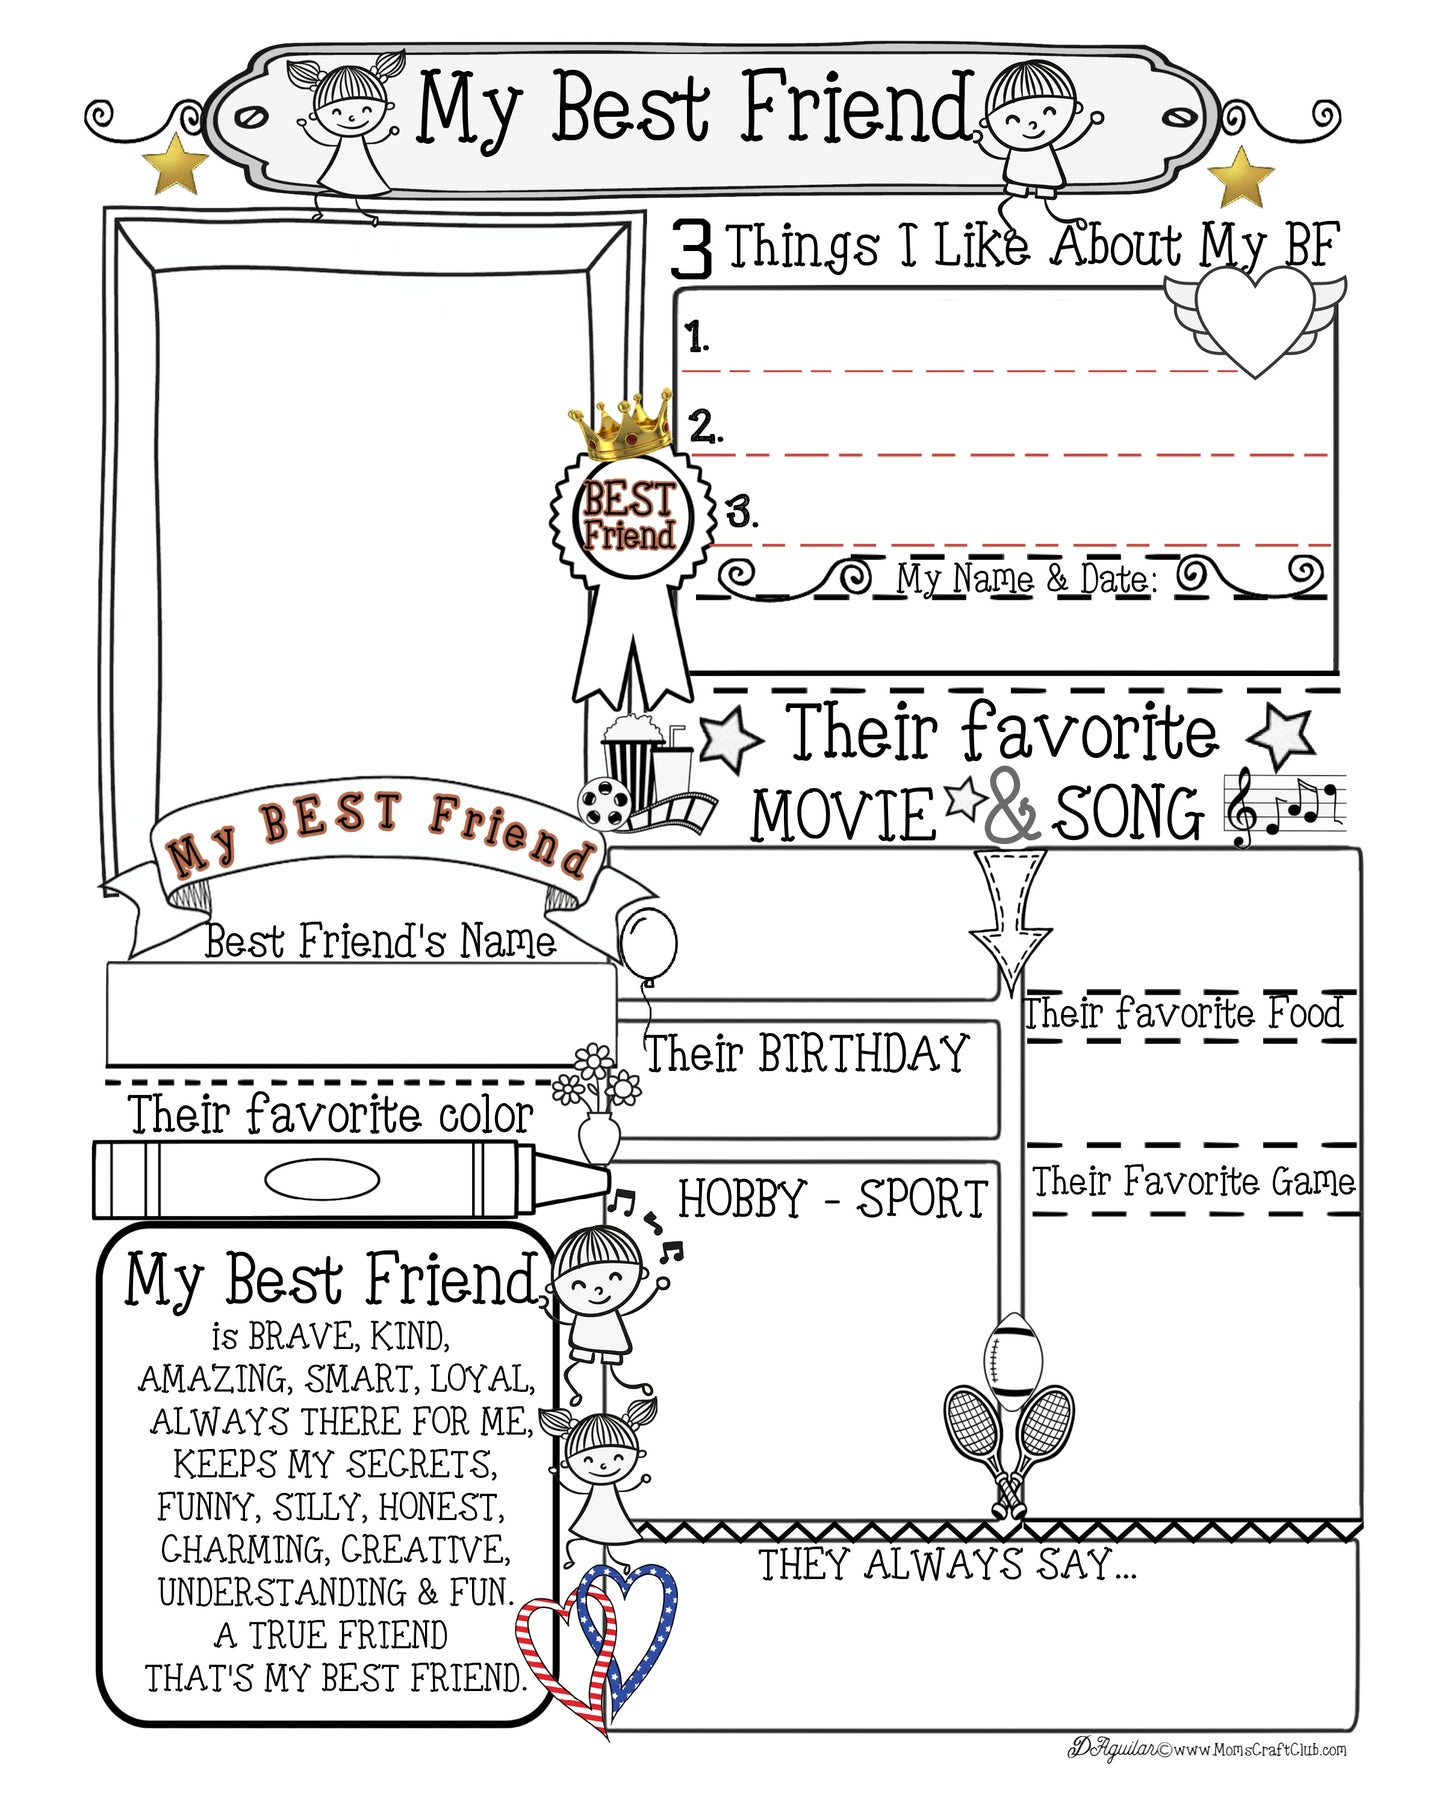 My Best Friend Coloring Page - Craft - Gift -8x10 Frame Ready